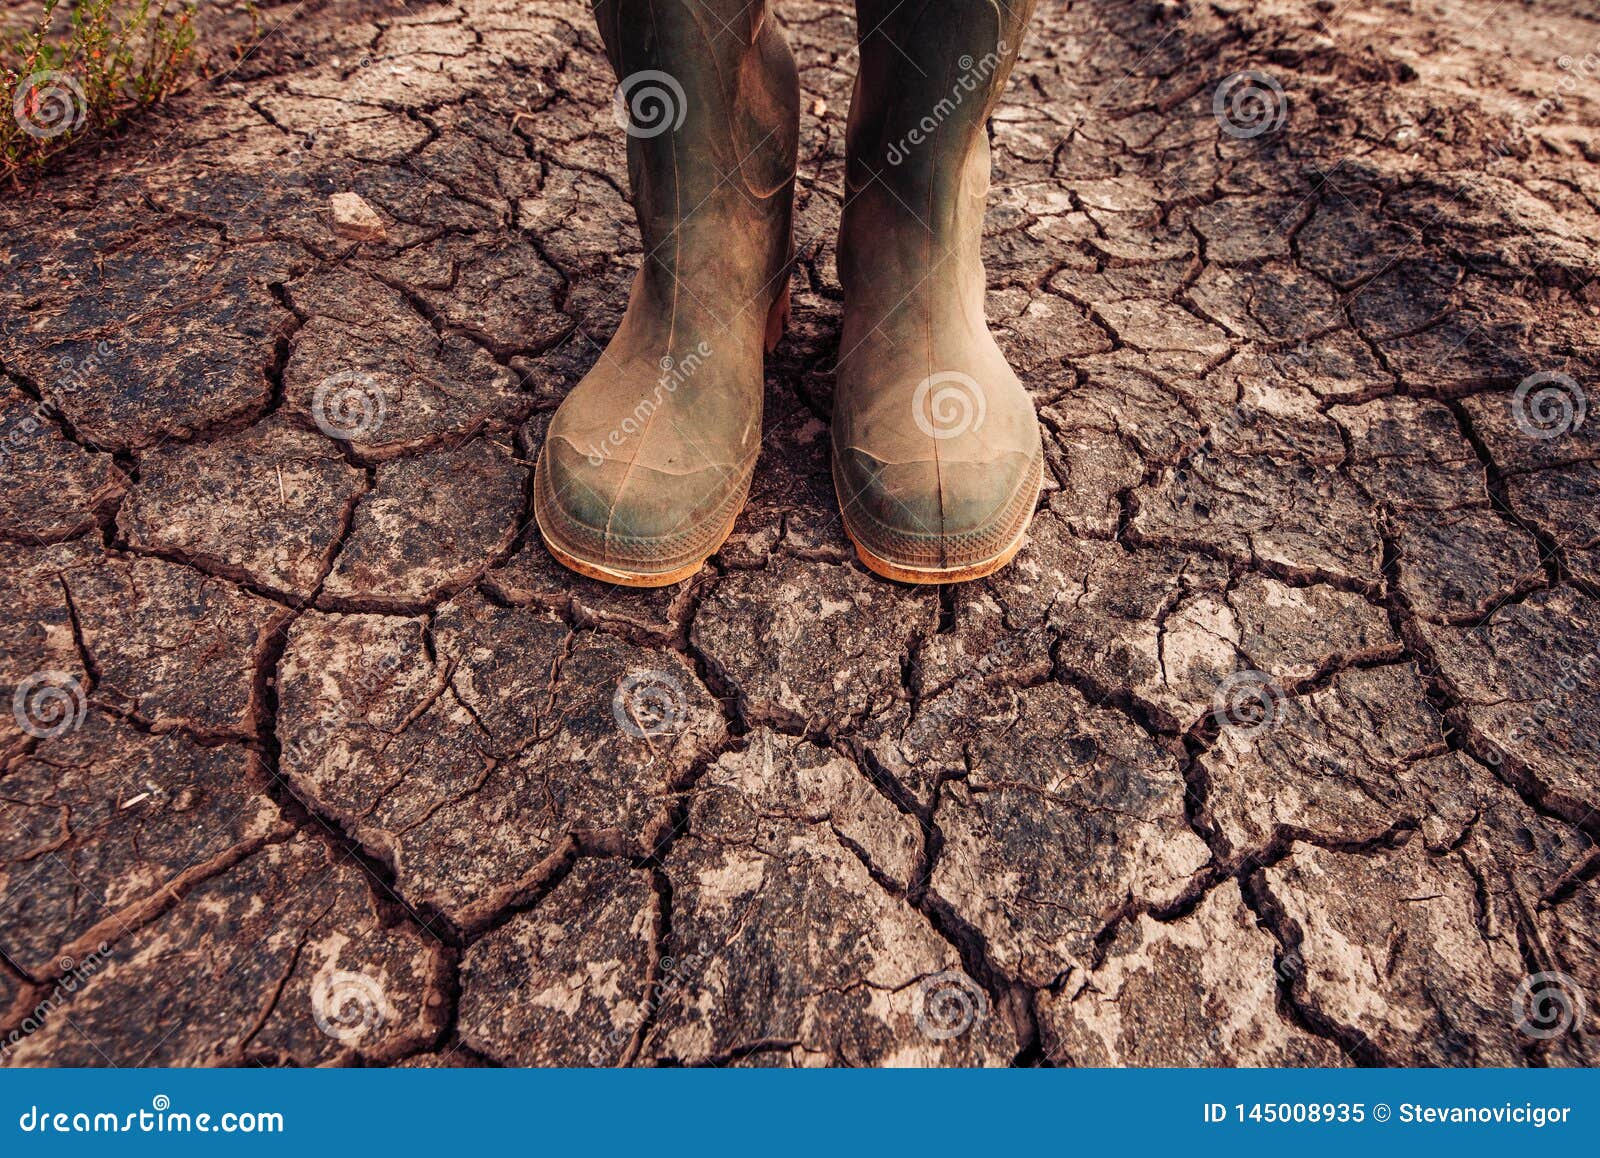 farmer in rubber boots standing on dry soil ground